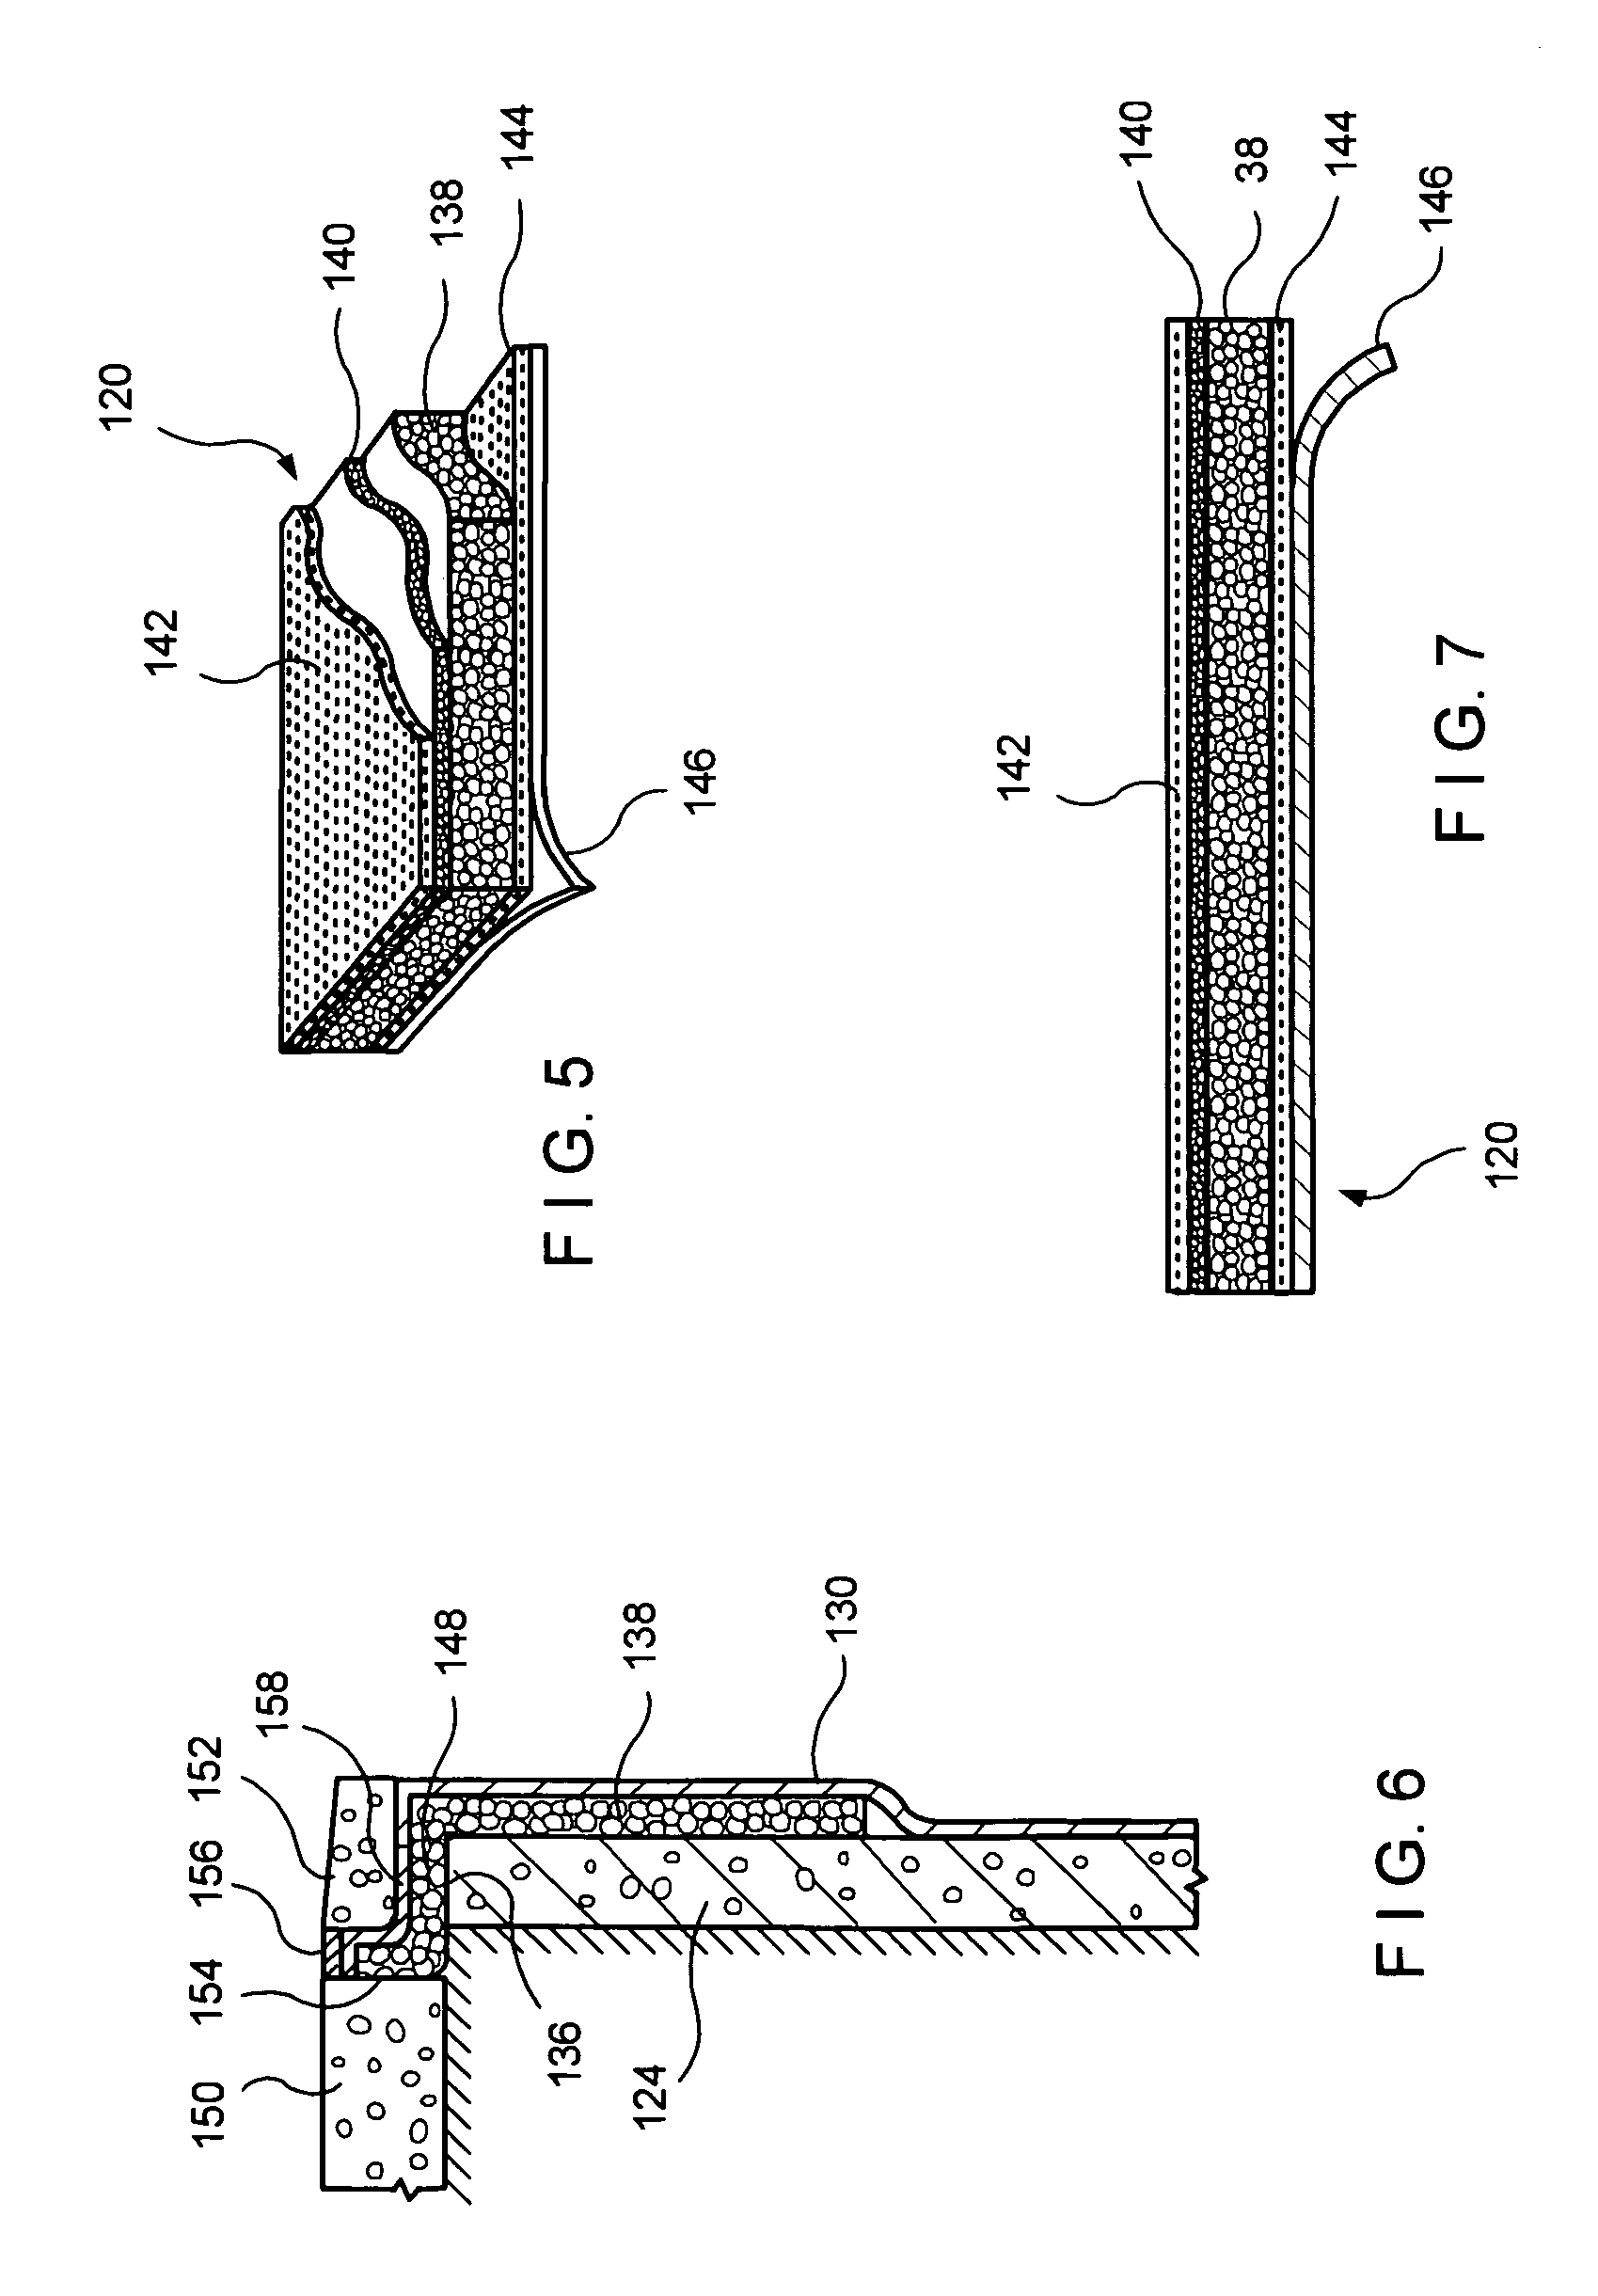 Foam interlining device for swimming pools